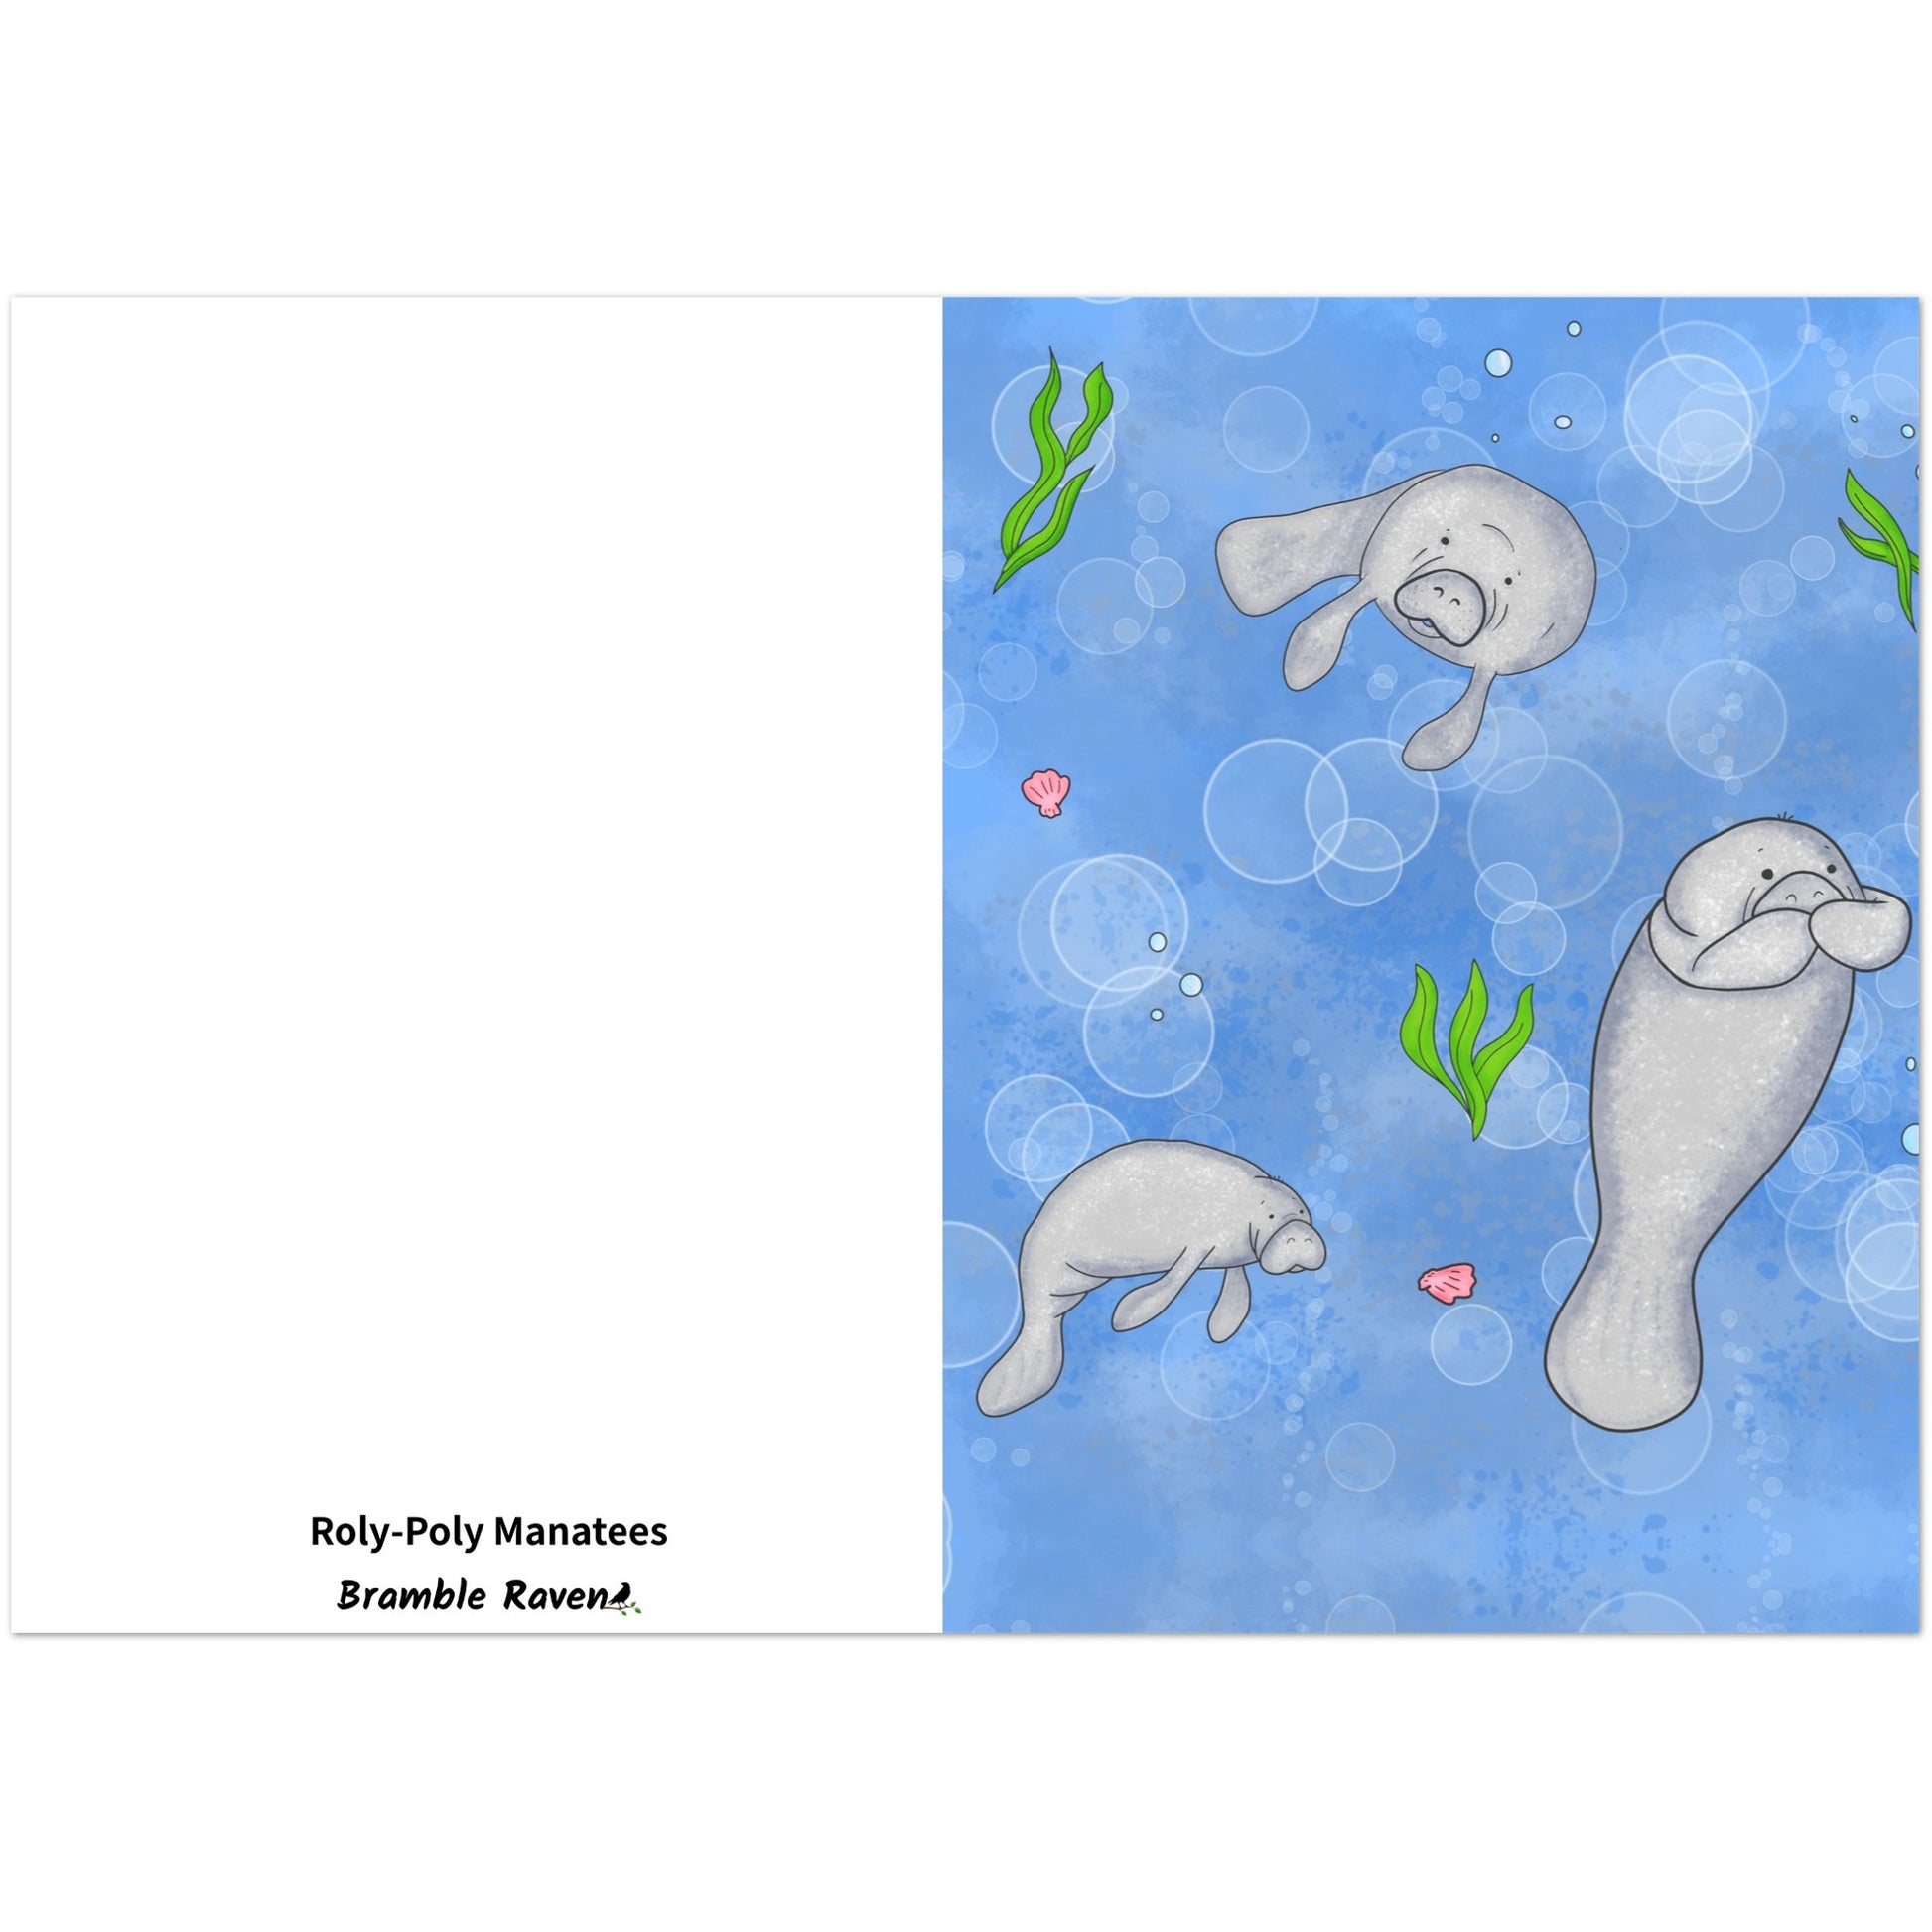 Pack of ten 5 x 7 inch greeting cards. Features illustrated roly-poly manatees on the front. Inside is blank. Made of coated paperboard. Comes with envelopes.